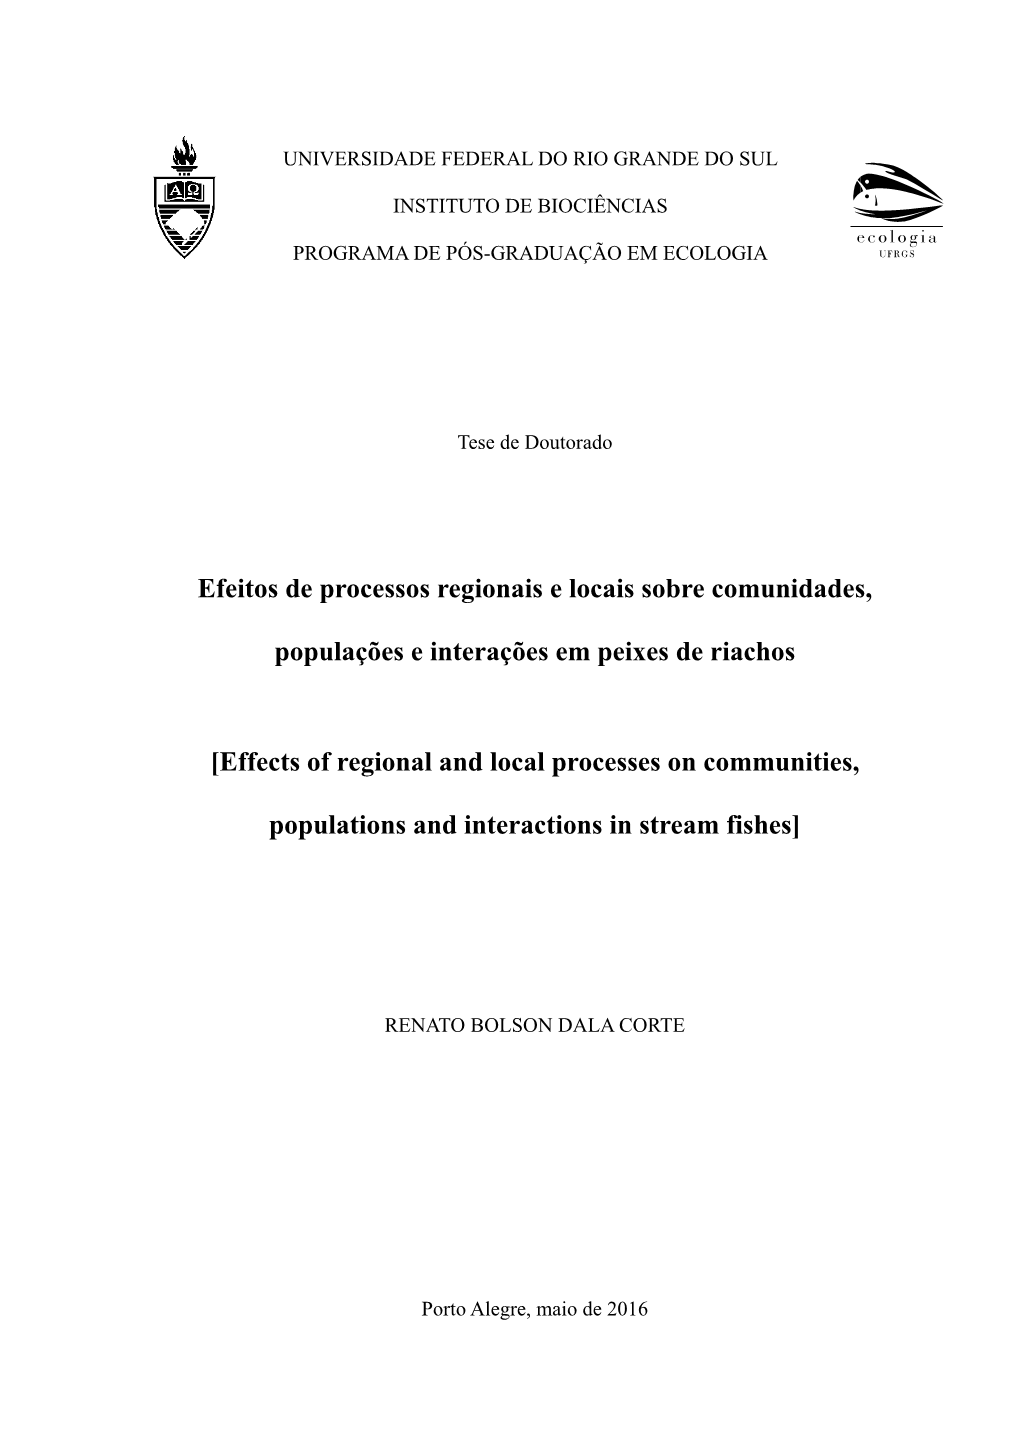 Effects of Regional and Local Processes on Communities